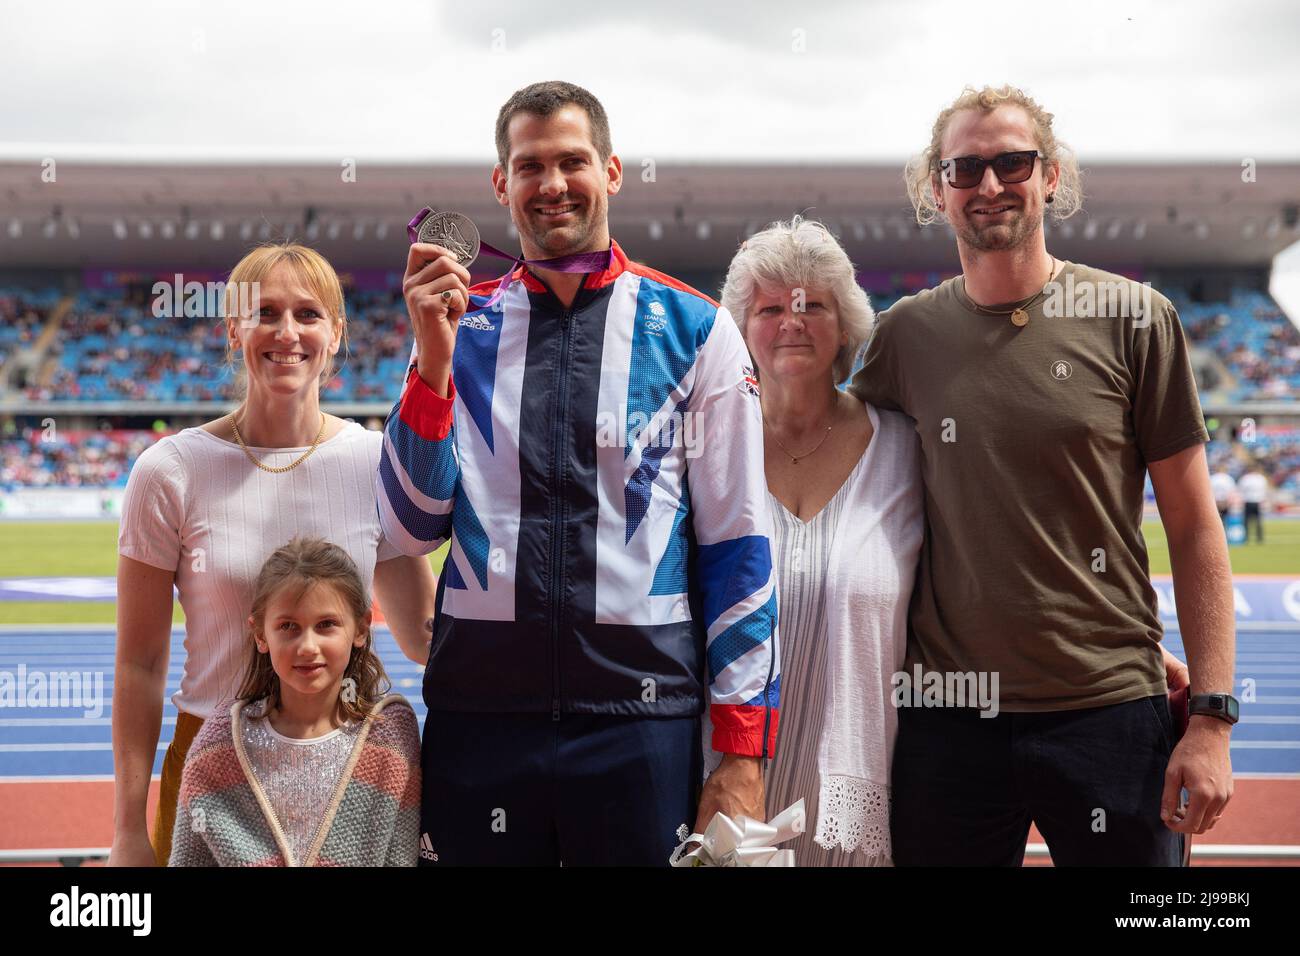 Birmingham, England. 21st May, 2022. Robbie Grabarz, with family, of Team GB receives a silver medal for the London 2012 High Jump following Ivan Ukhov being stripped of the gold medal at the Müller Diamond League athletics event at the Alexander Stadium in Birmingham, England. Credit: Sporting Pics / Alamy Live News Stock Photo